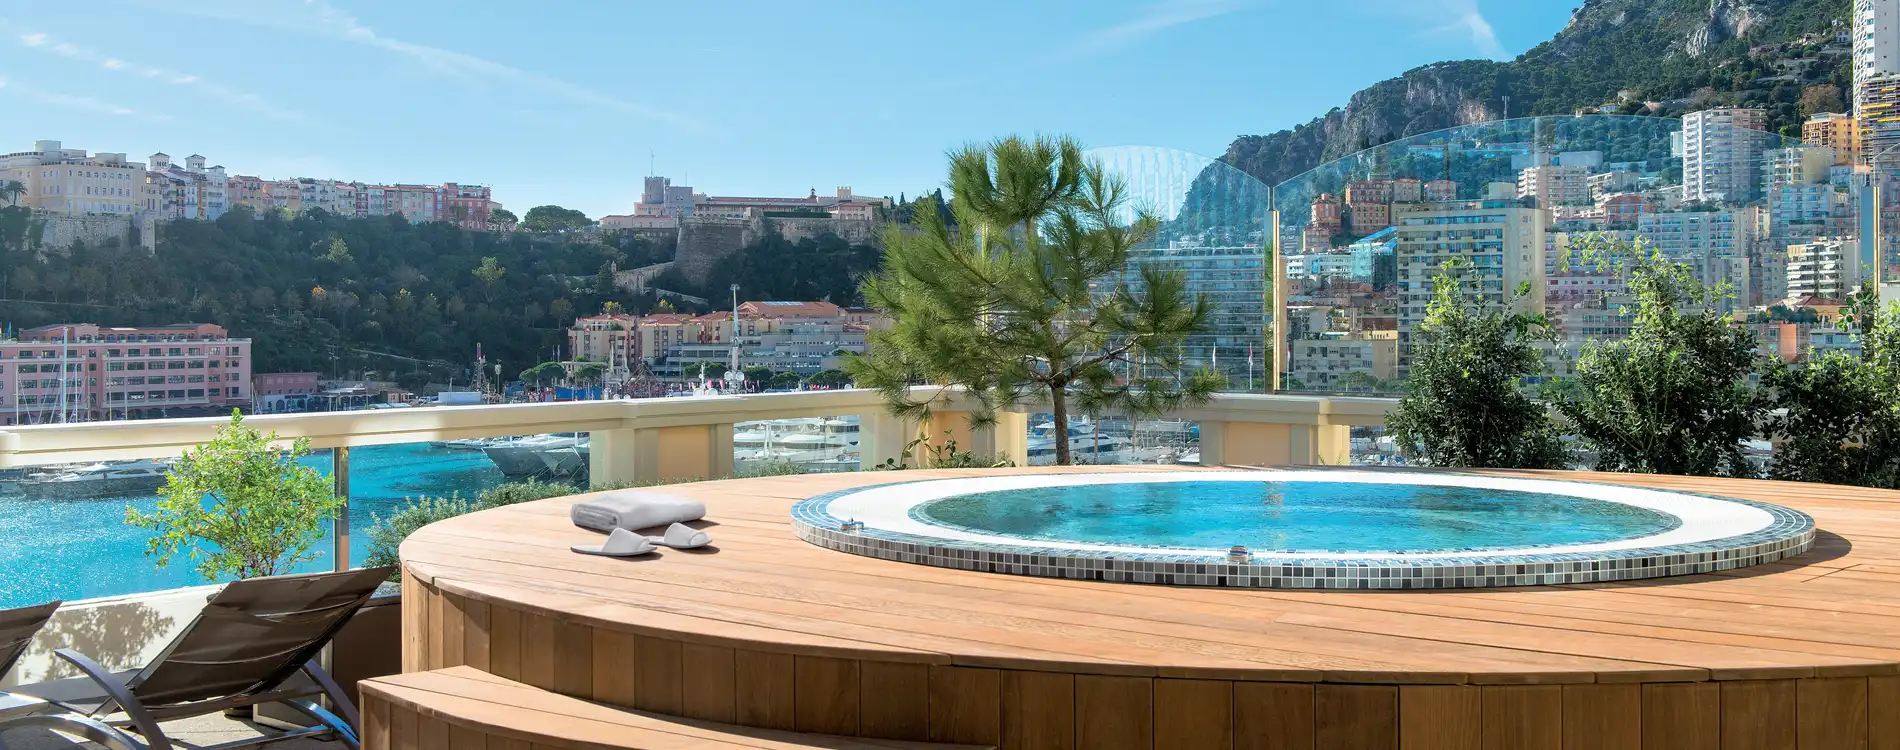 Thermes Marins Monte-Carlo - Jacuzzi